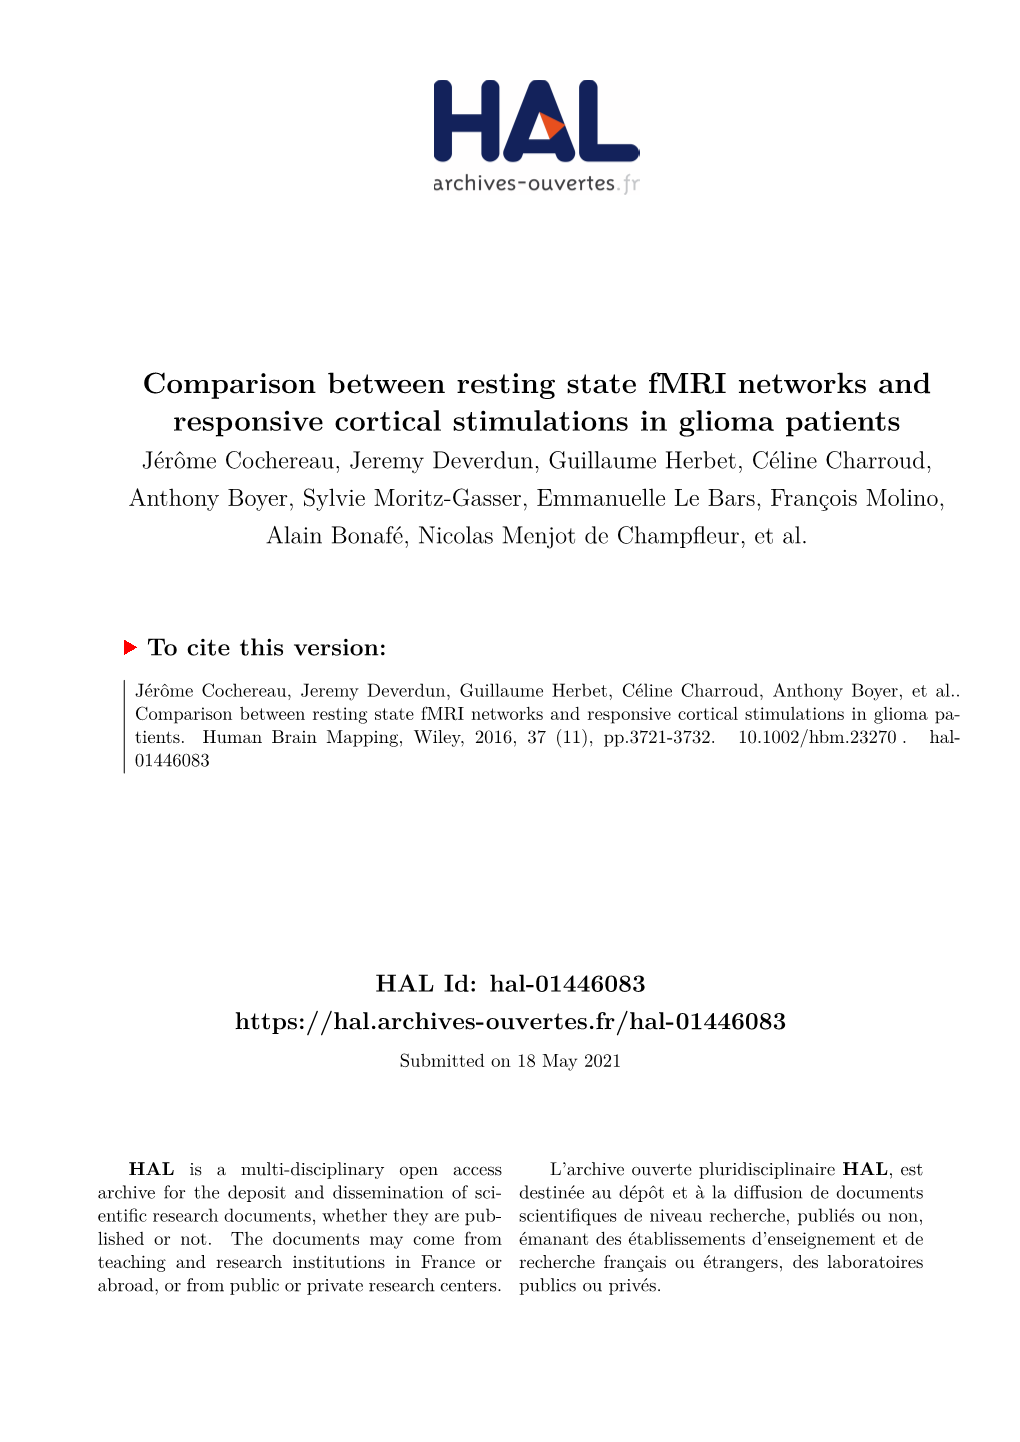 Comparison Between Resting State Fmri Networks and Responsive